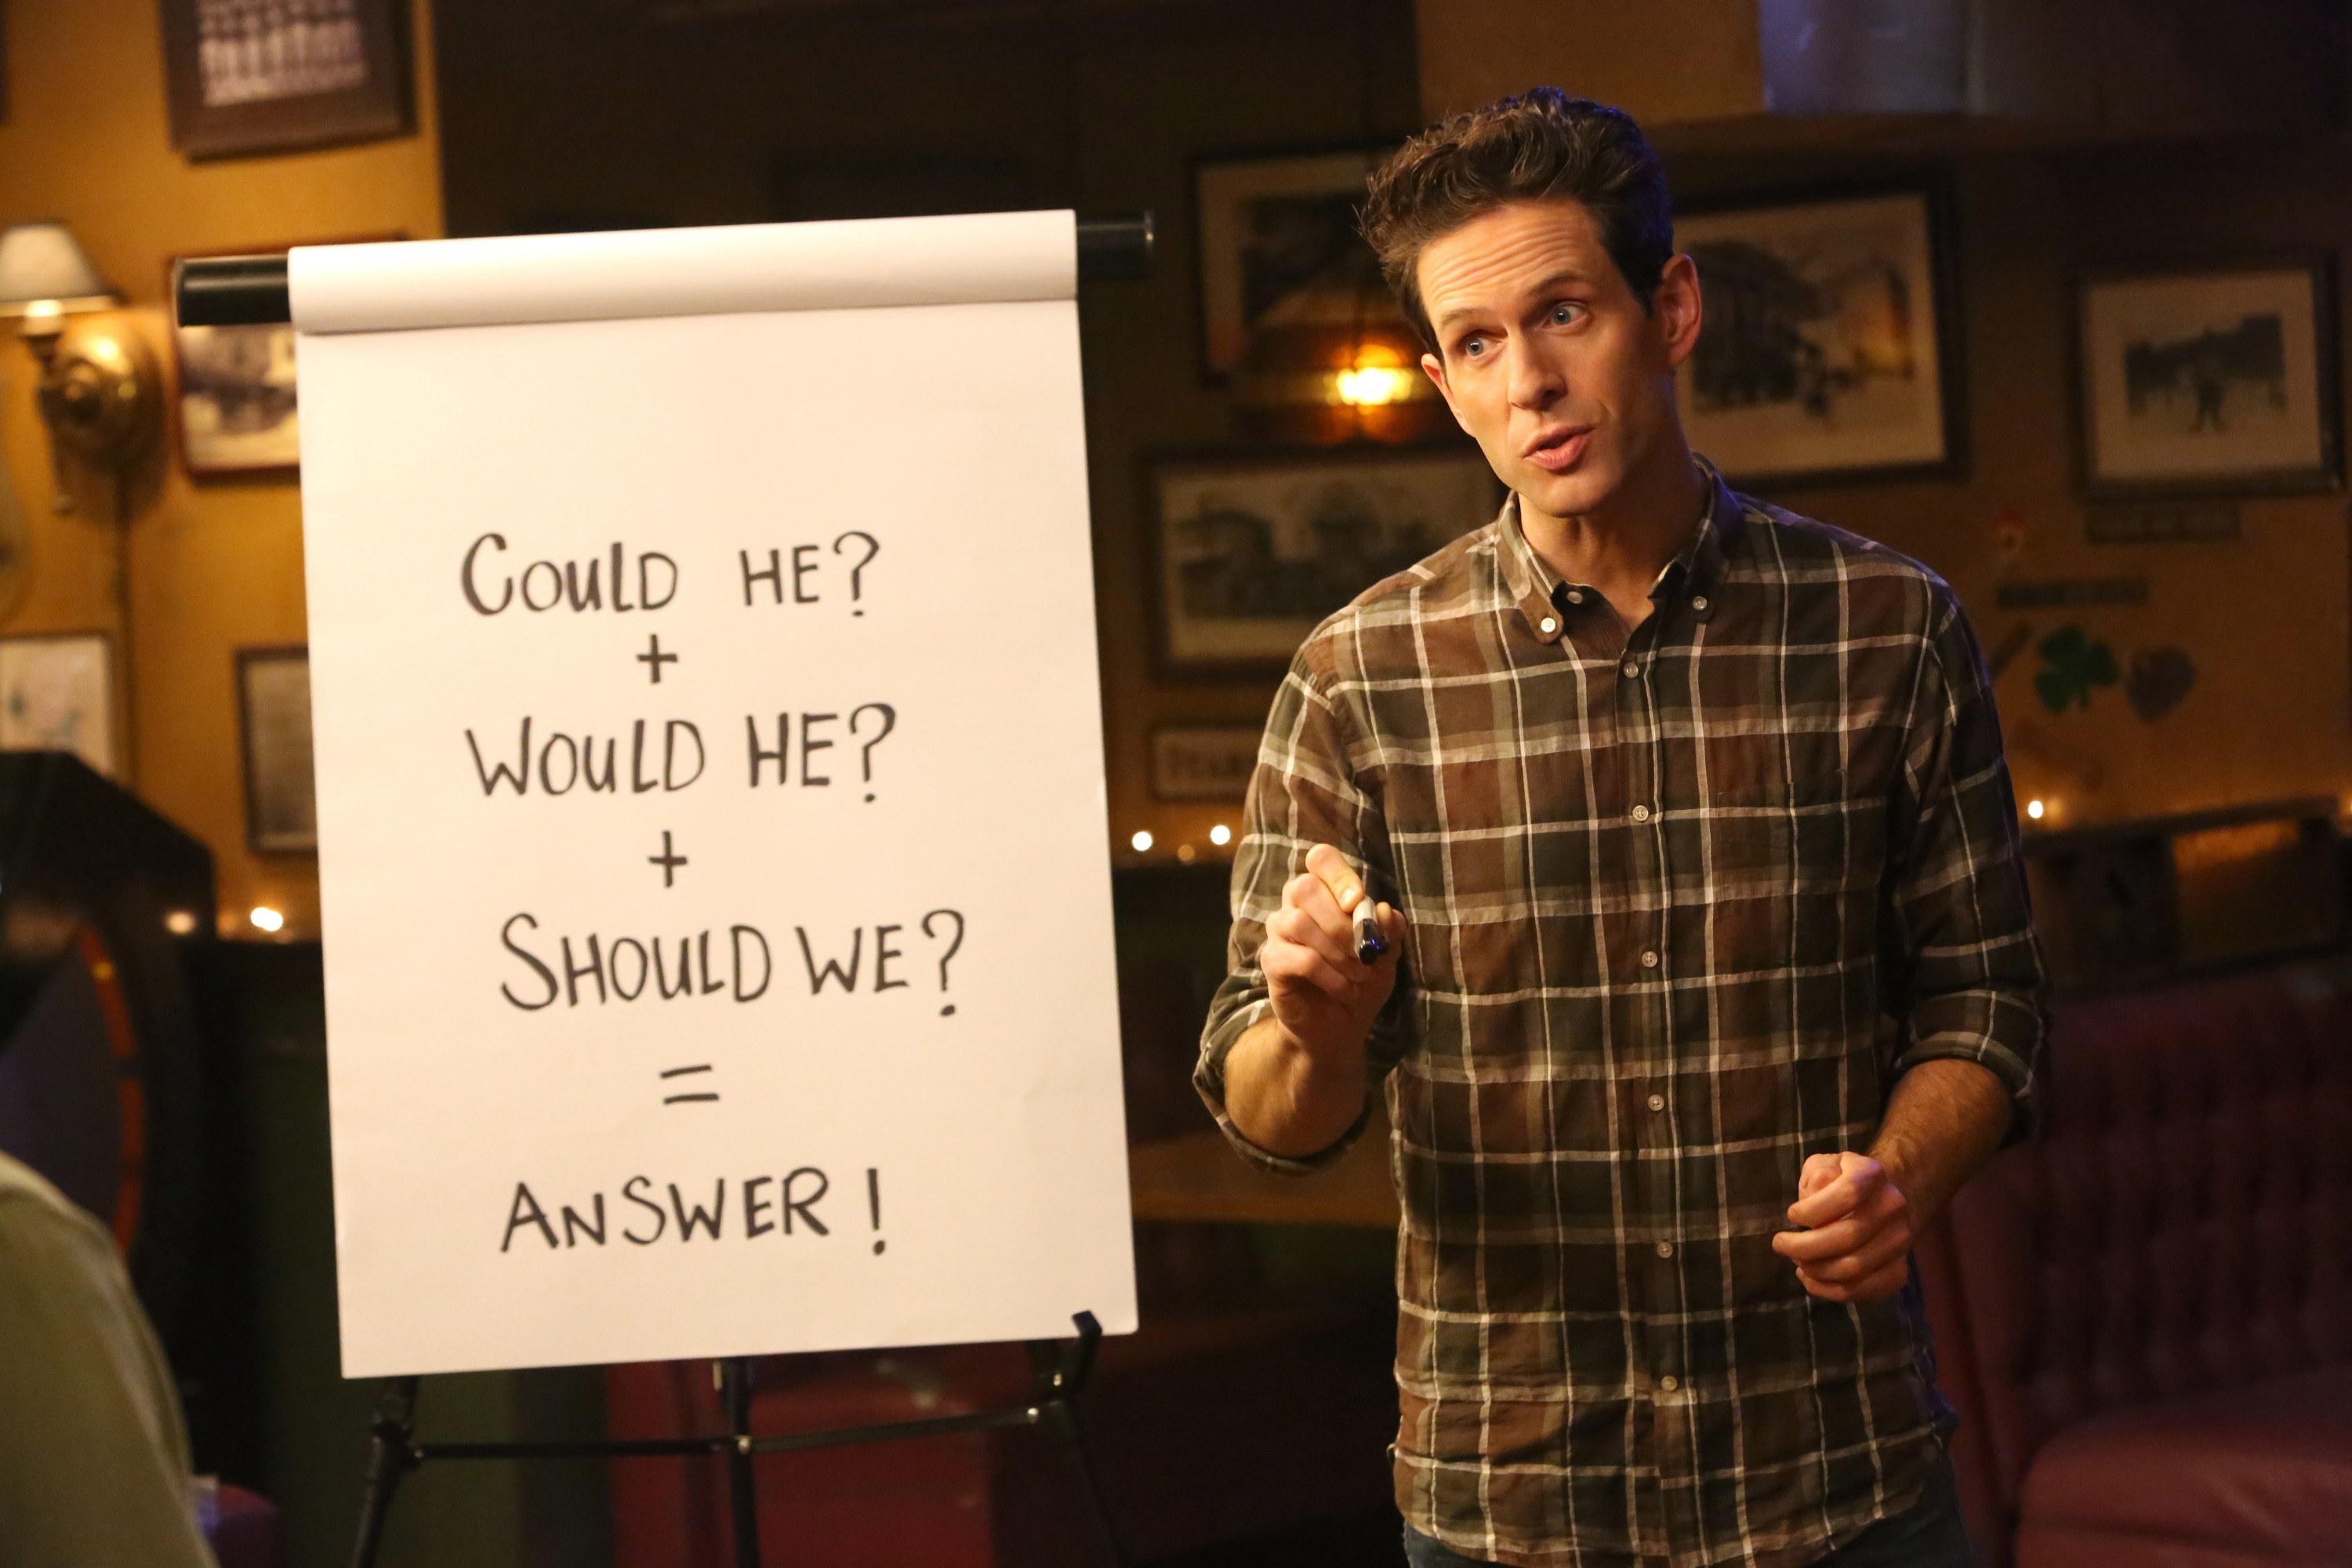 Dennis standing by sign: &quot;Could he + would he + should we = answer&quot;